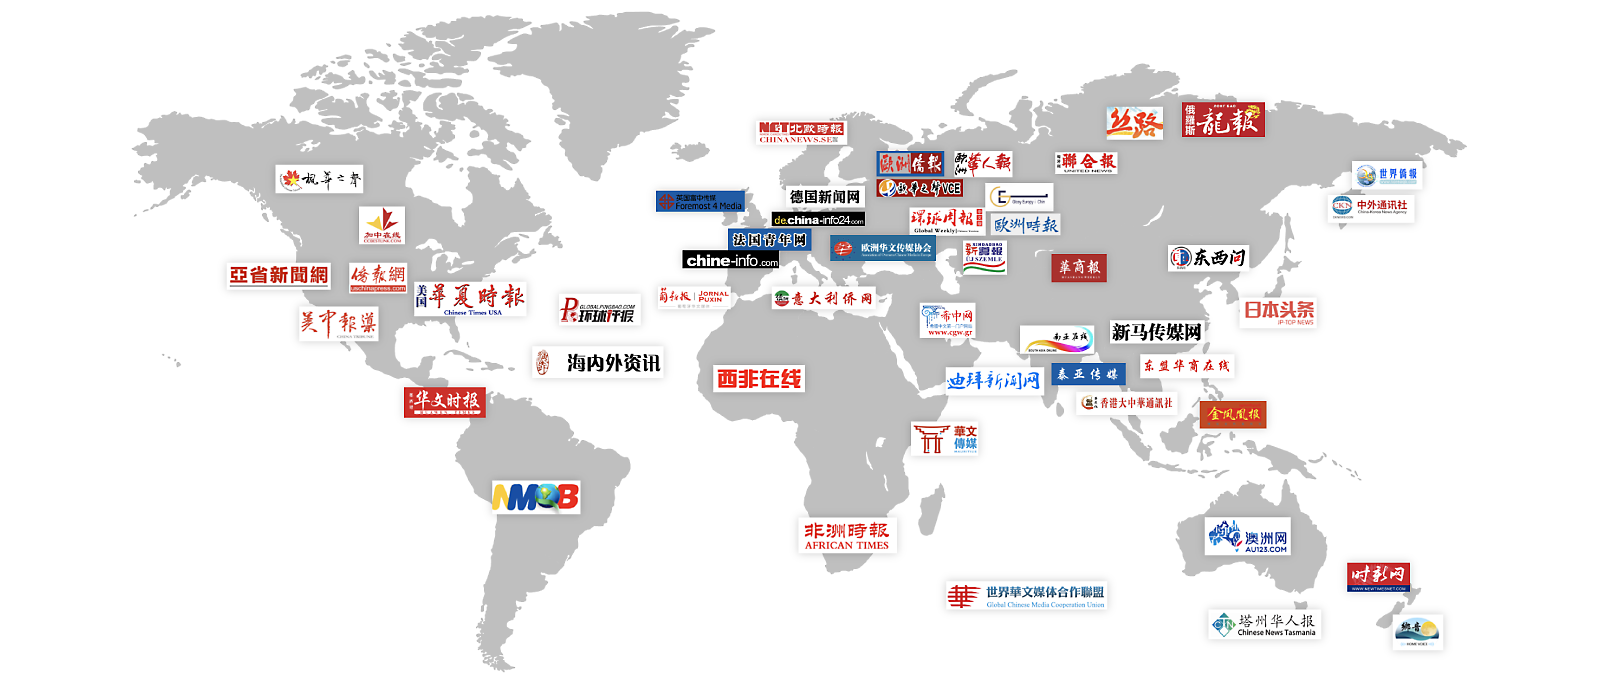 World map with more than 20 Chinese website logos of websites targeting the global Chinese diaspora.